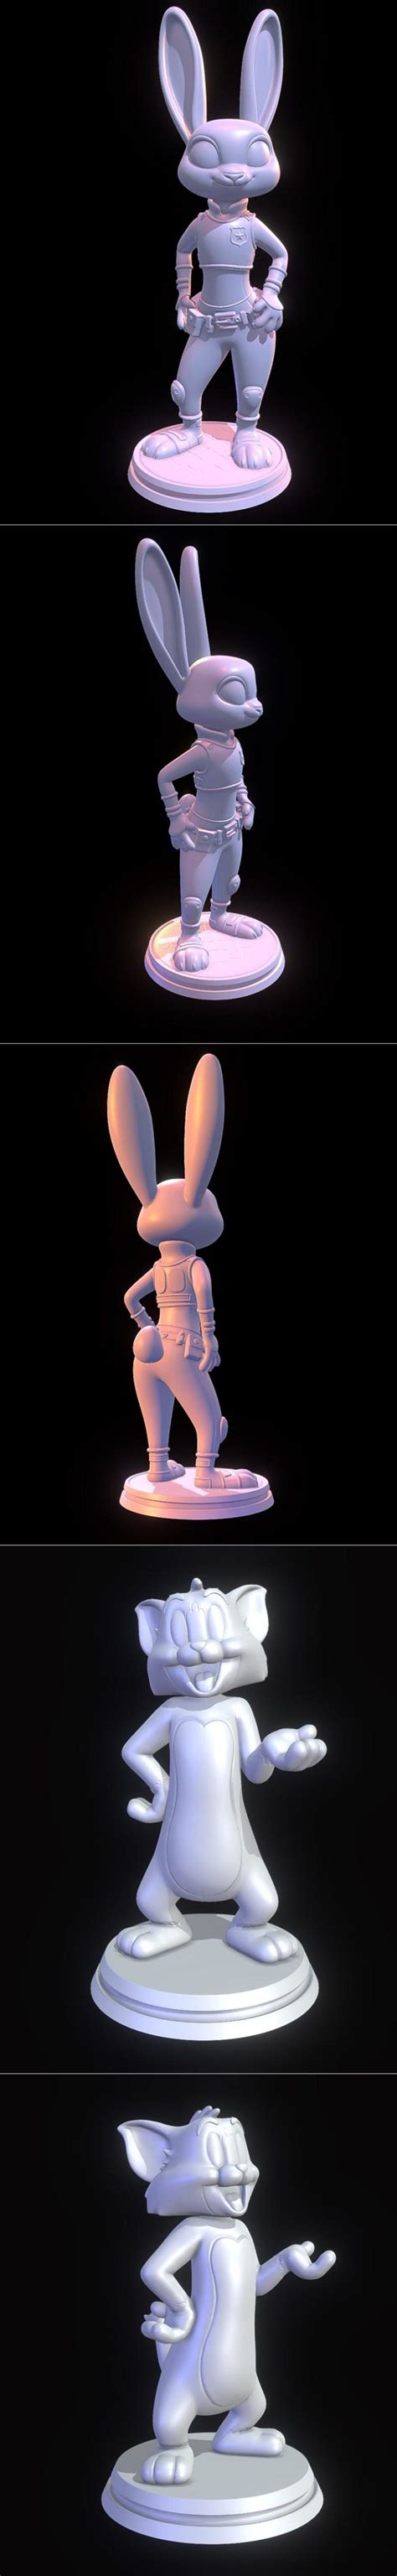 Desire Fx 3d Models Judy Hopps Zootopia And Tom Tom And Jerry